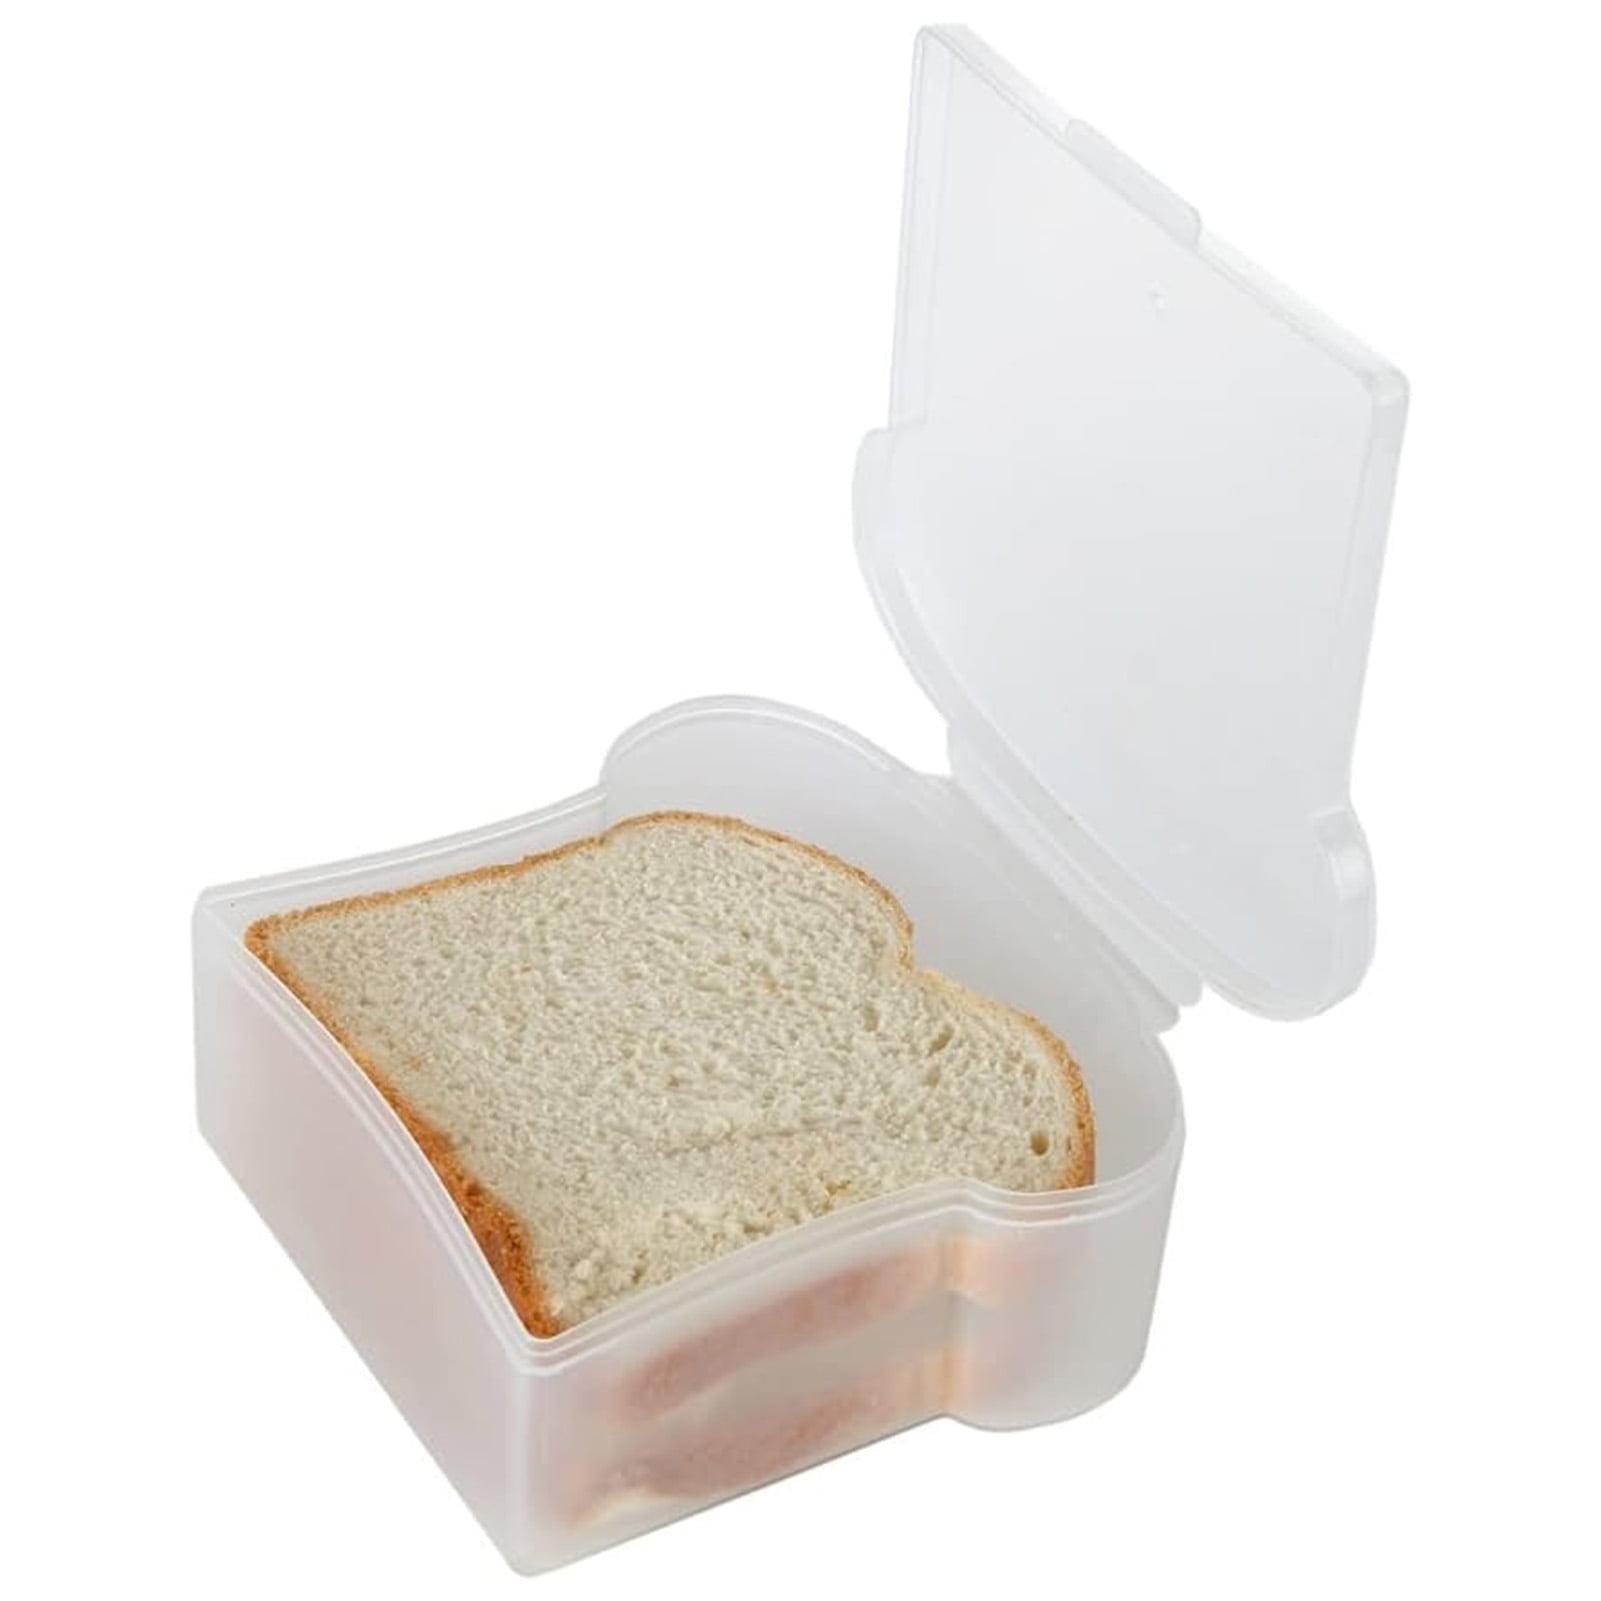  6 Pieces 20 oz Toast Shape Sandwich Box 5.3 x 5.5 x 2 Inches  Plastic Sandwich Containers Reusable Sandwich Holder for Lunch Box Sandwich  Lunch Box Colorful Sandwich Food Storage for